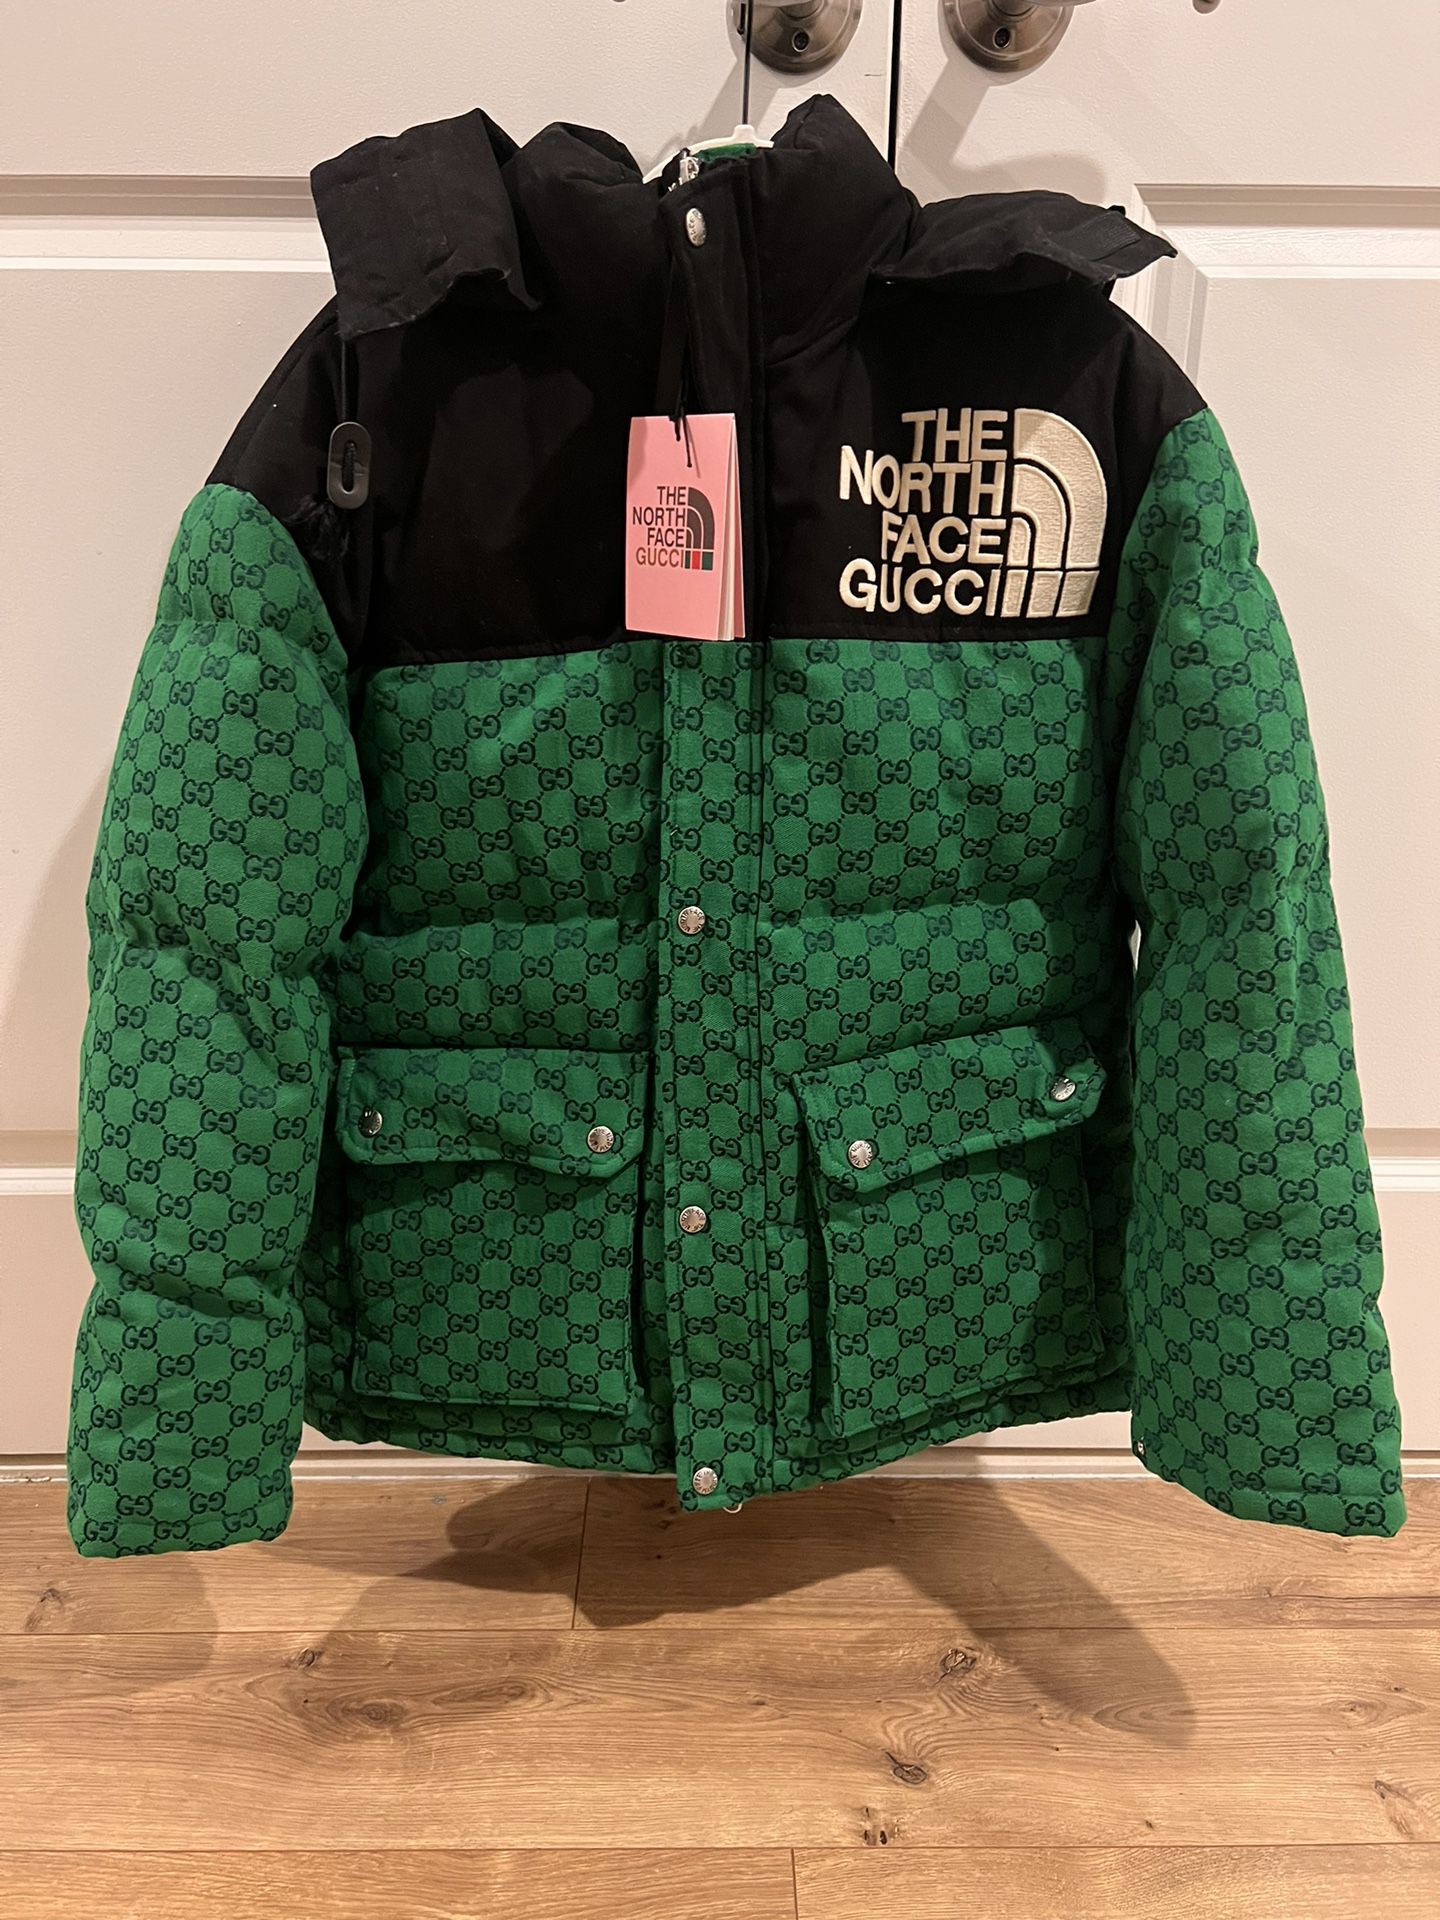 Gucci x the North Face Jacket for Sale in Bowie, MD - OfferUp